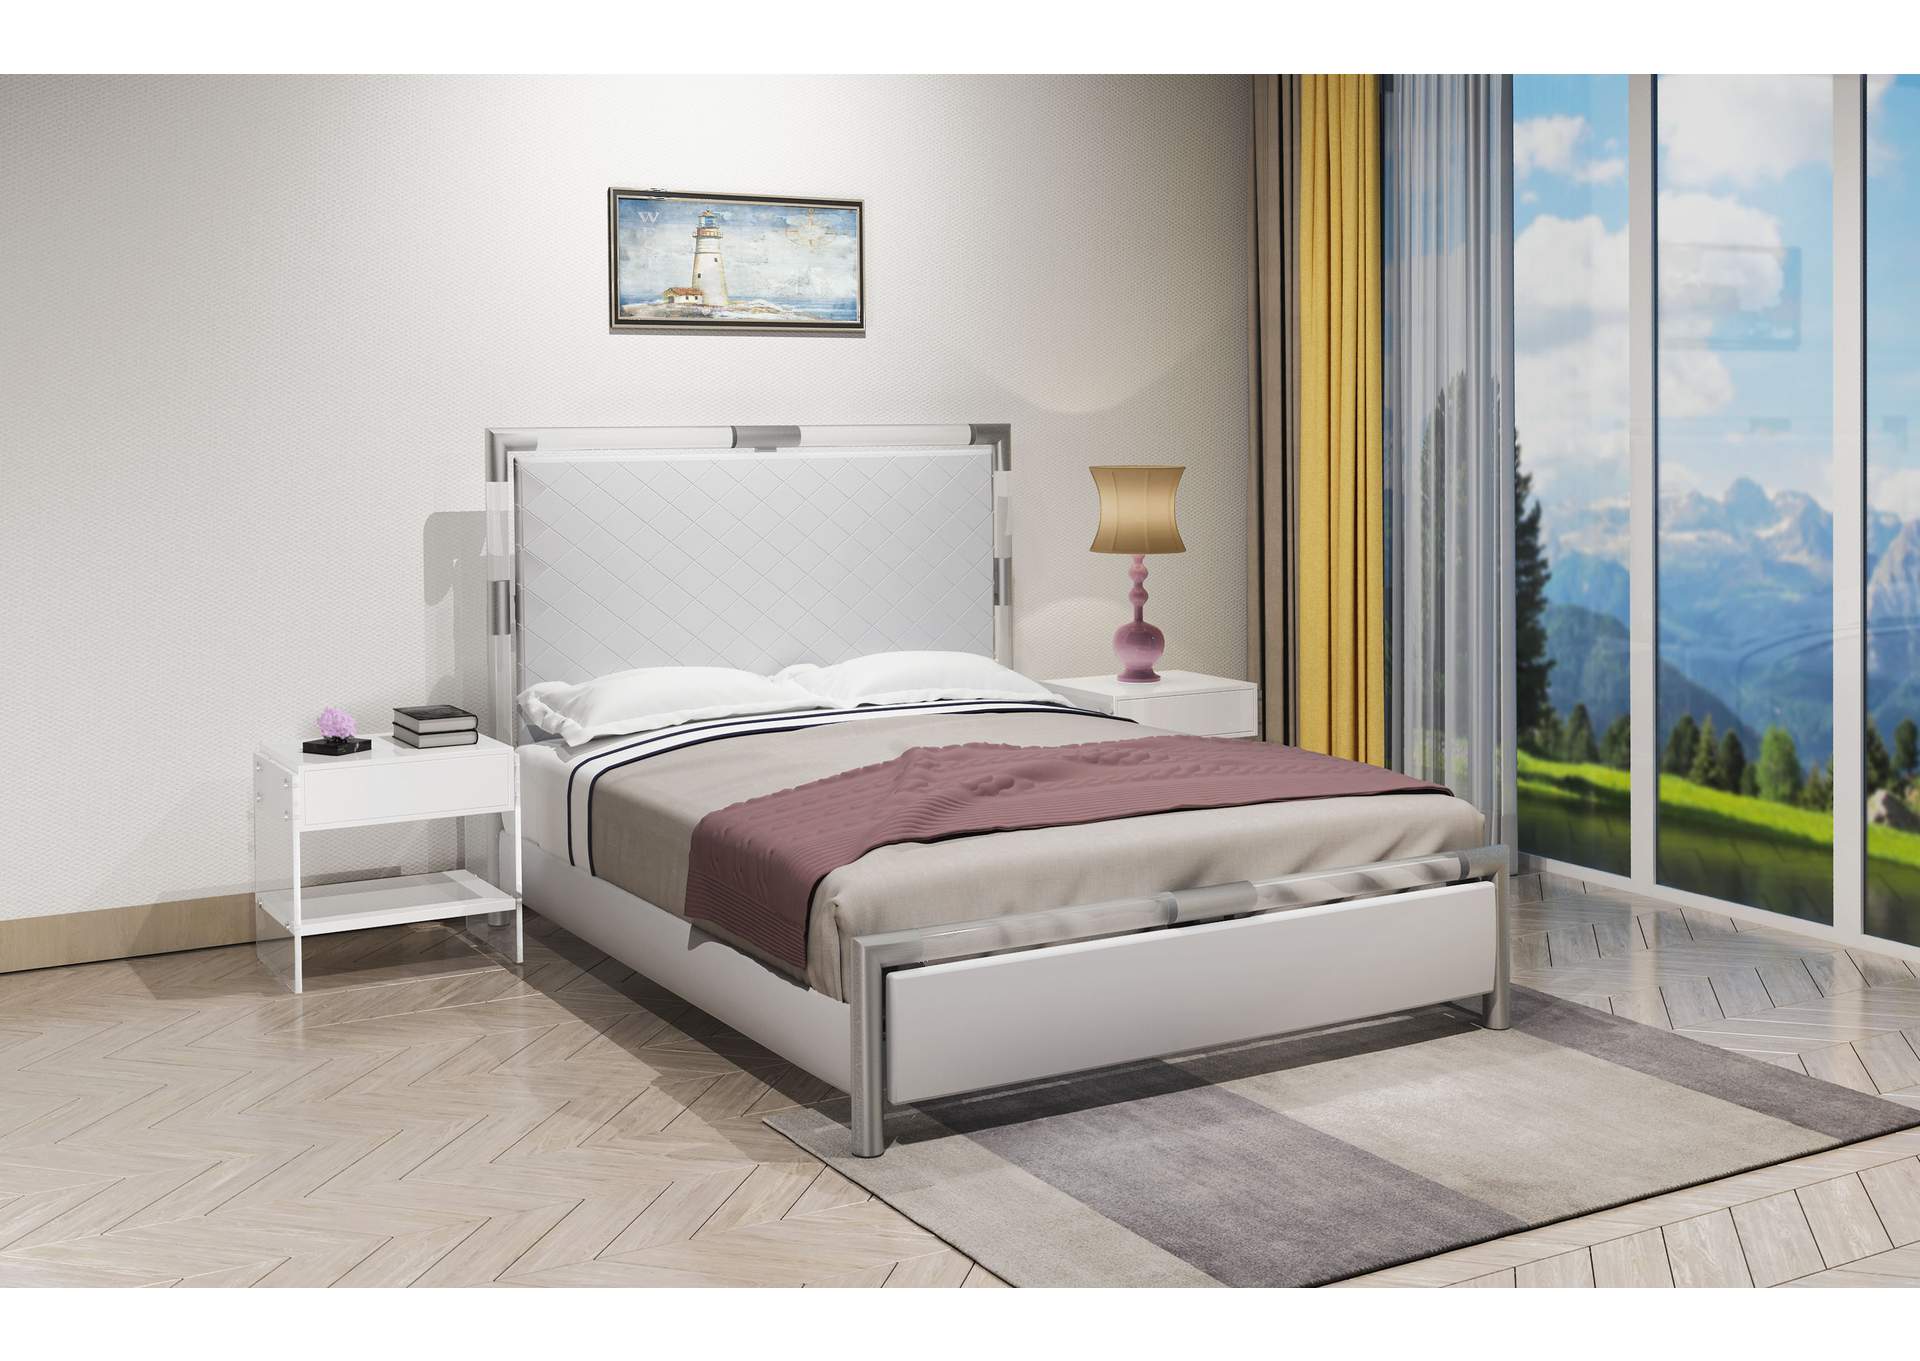 Acrylic Bedroom Set With King Bed , Buffet & Lamp Table,Chintaly Imports